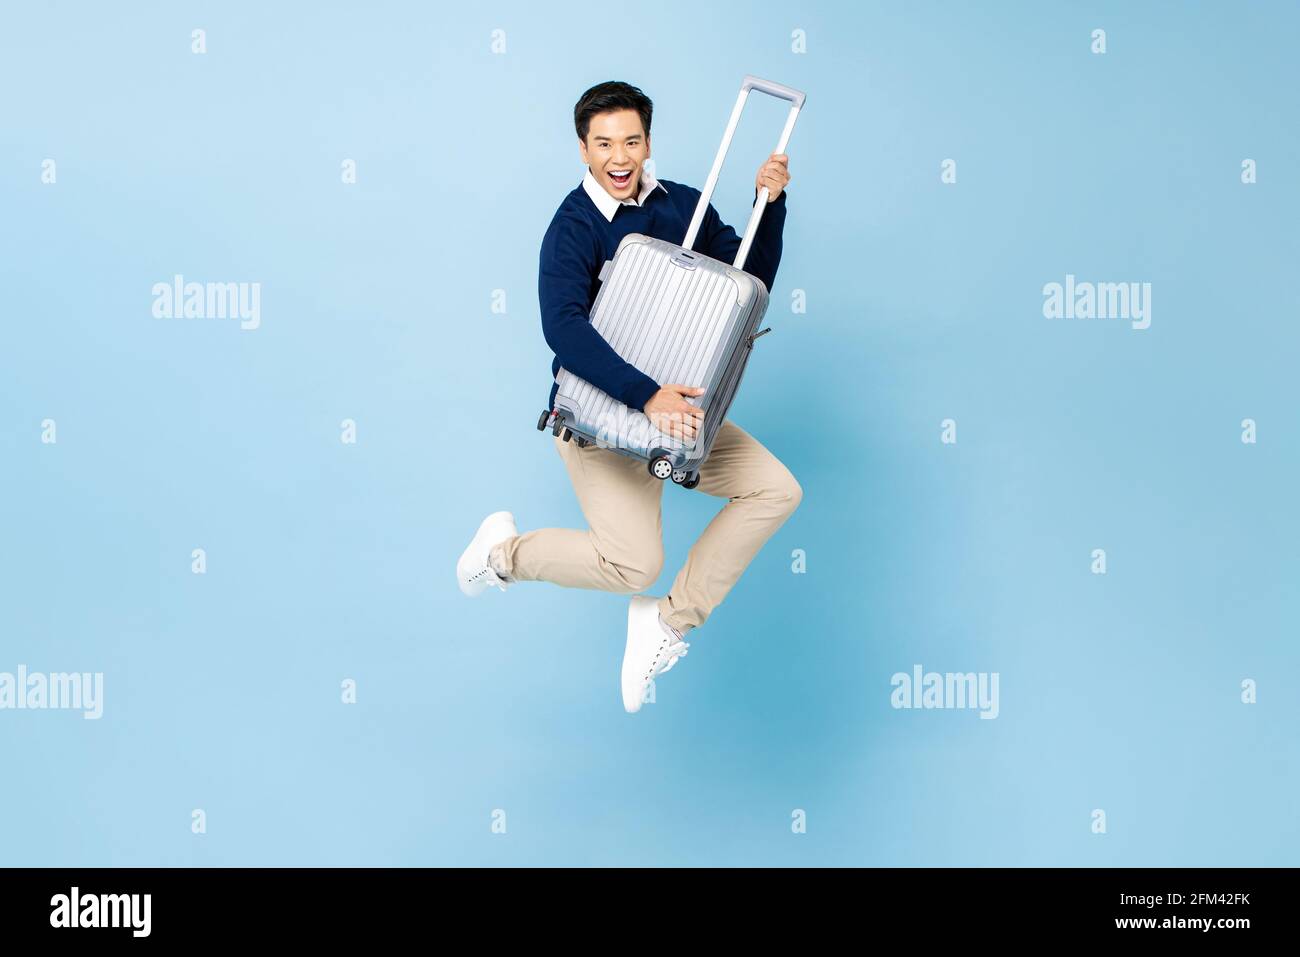 Fit healthy smiling young handsome Asian tourist man with baggage jumping in mid-air ready to fly isolated on light blue studio background Stock Photo